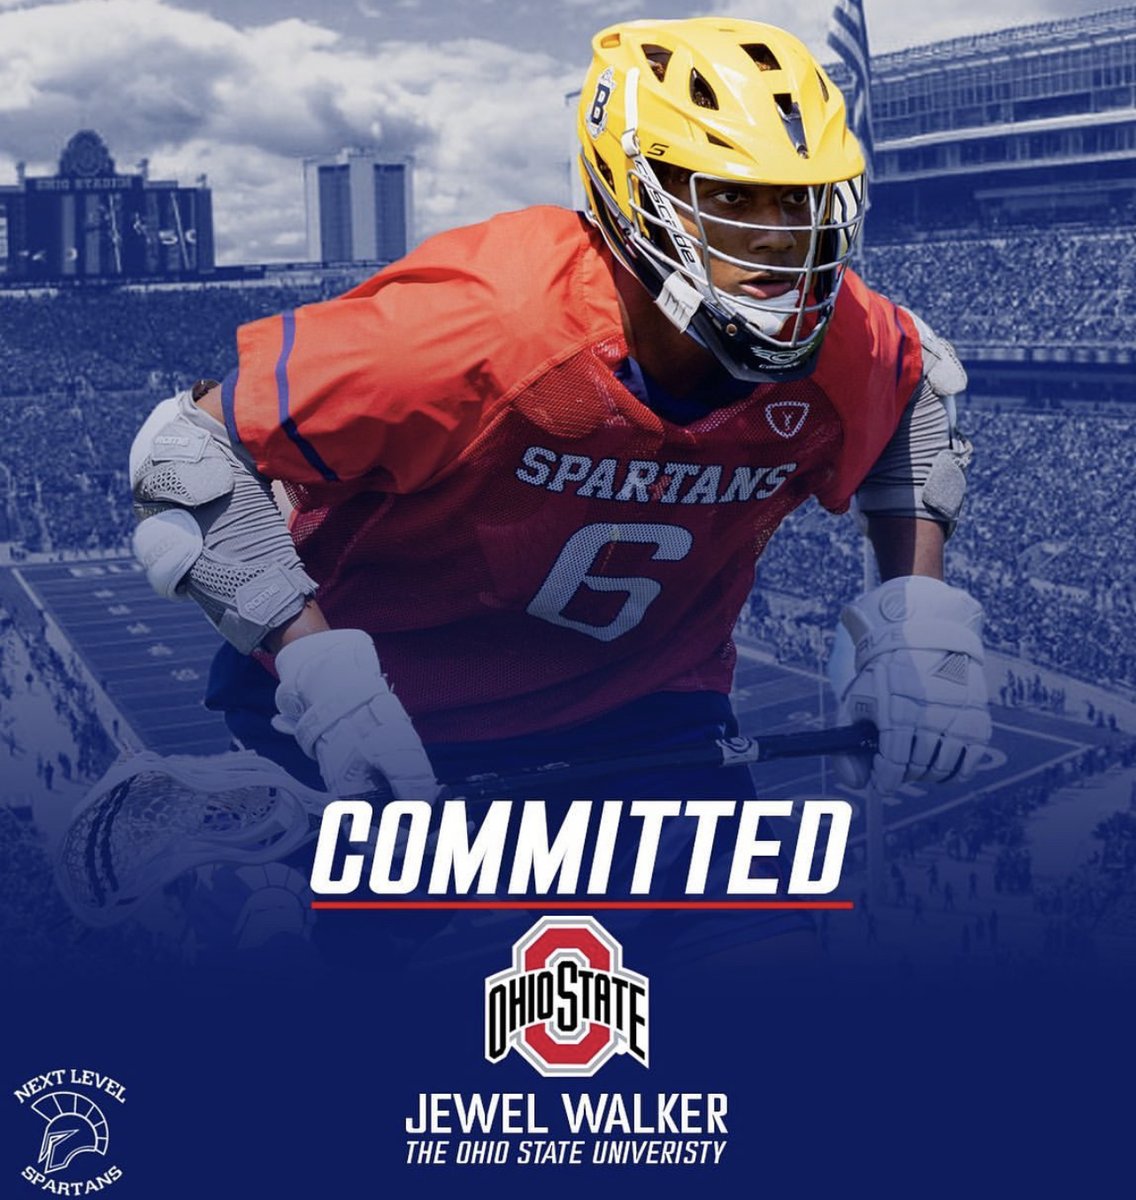 .@OhioStateMLAX ventures back into the DMV to snag ‘24 midfielder Jewel Walker from @NextLevelLax. @BullisLacrosse standout is a 6-4, 205-pounder who earned All-IAC honors as a sophomore. Also a very good 🏀 player, he’s very athletic and agile for his size.